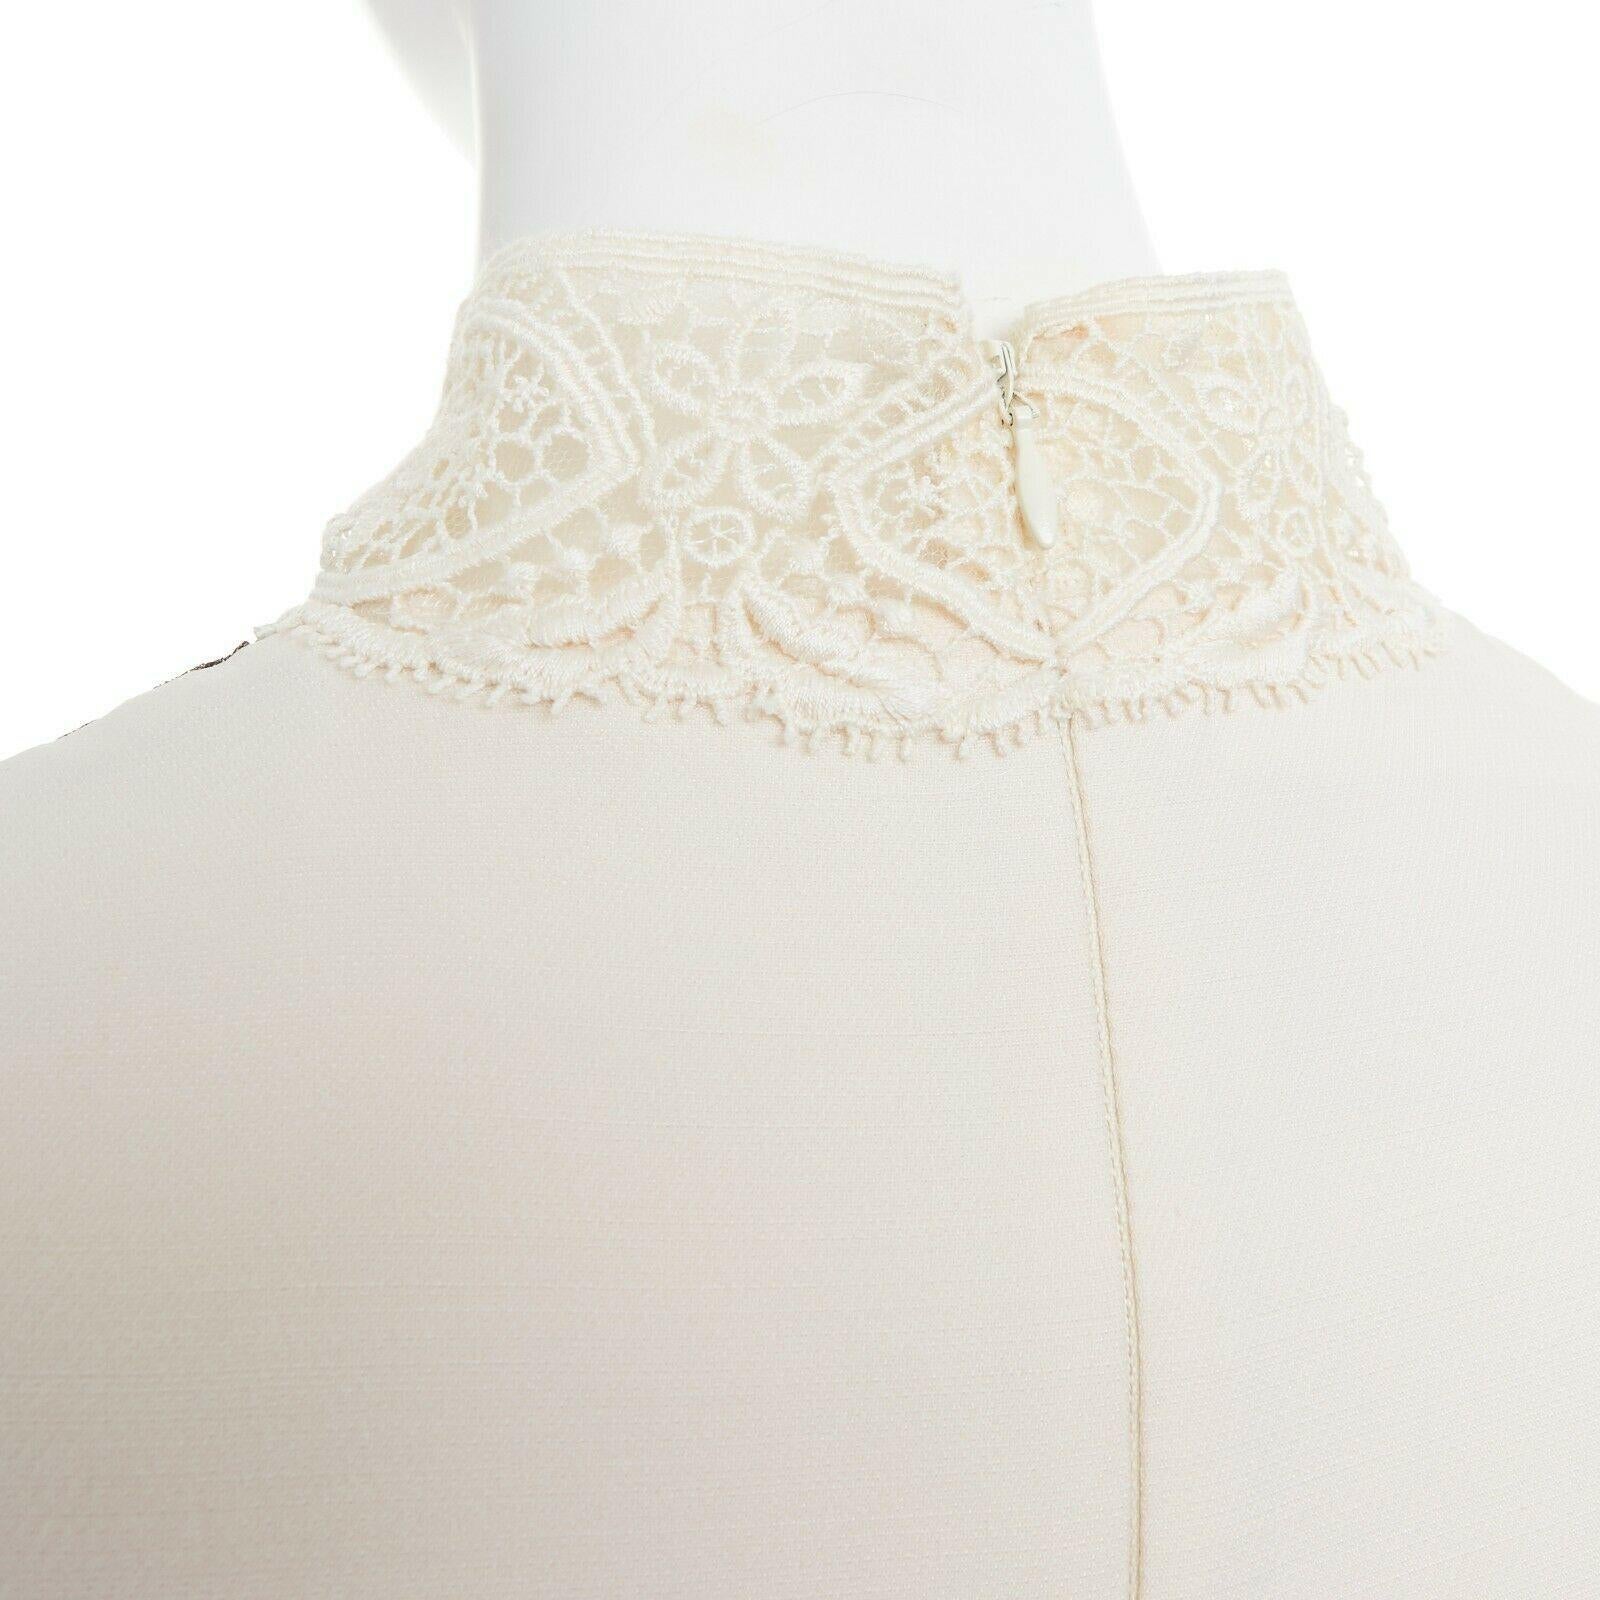 VALENTINO cream wool silk crepe embroidered lace high collar cocktail dress IT42 6